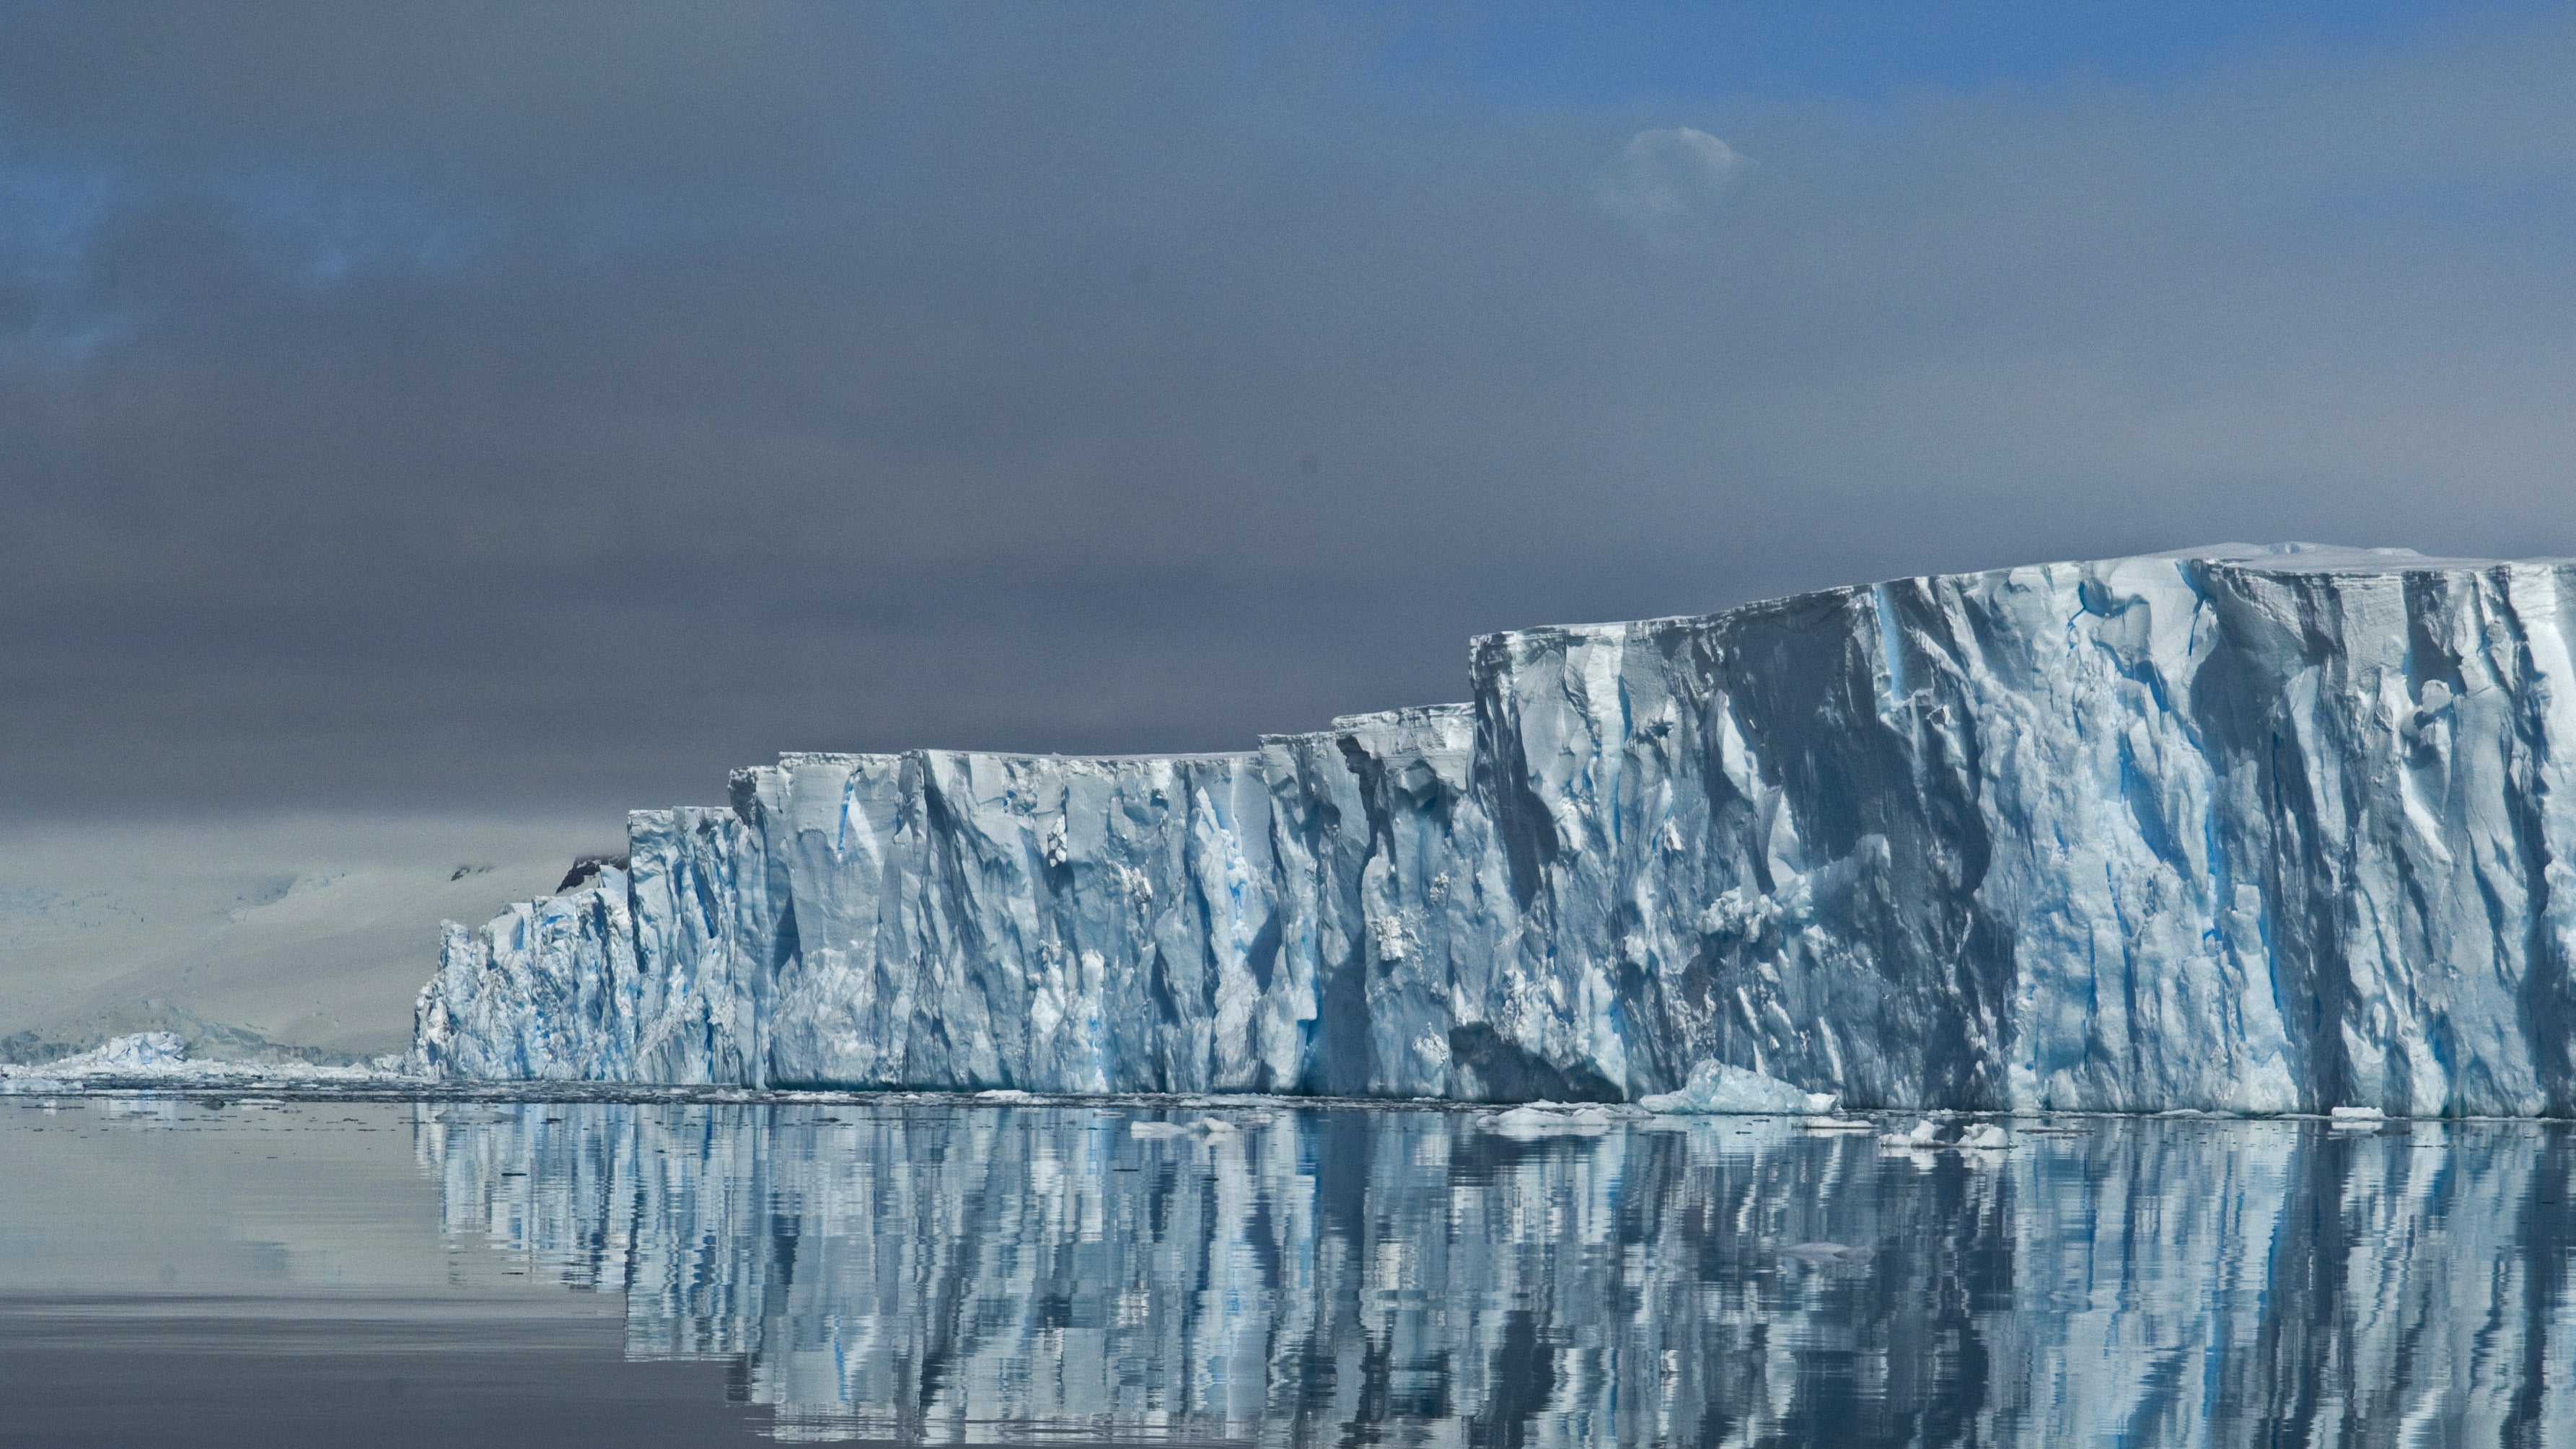 The floating ice shelf currently preventing the rapid disintegration of the Thwaites glacier